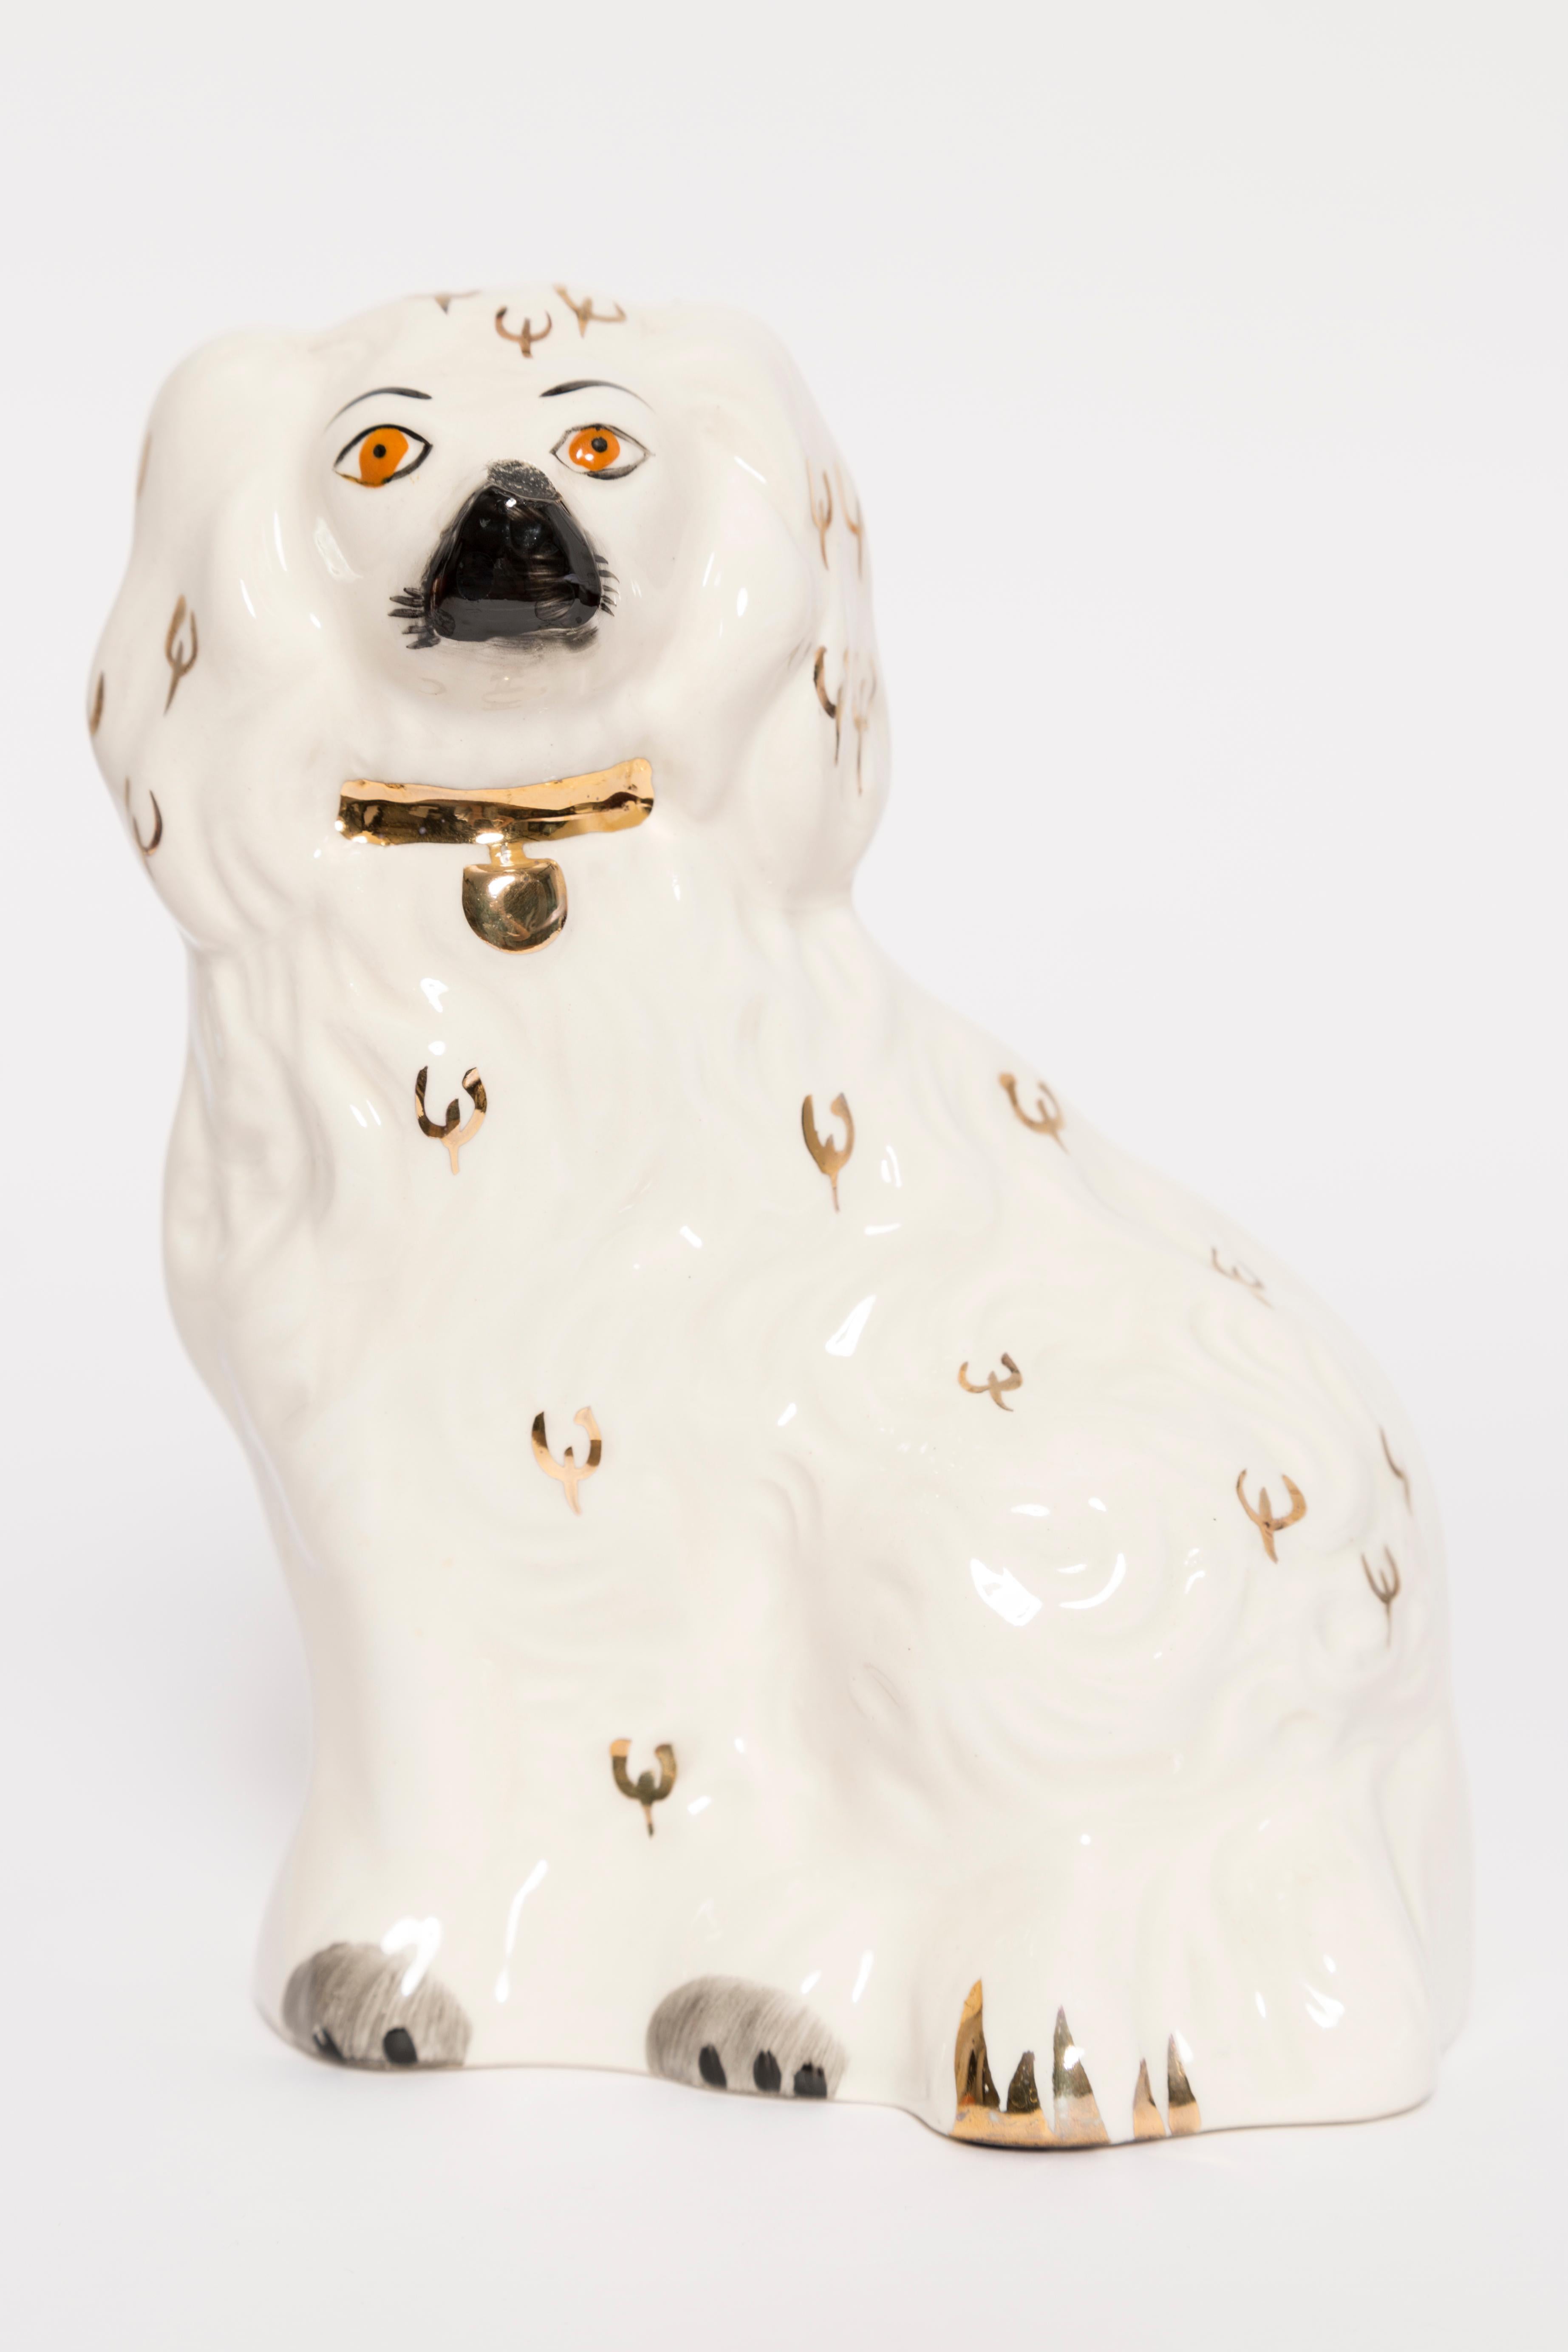 Painted ceramic, good original vintage condition. Beautiful and unique decorative sculpture. Yorkshire Dog Sculpture was produced in Staffordshire, England in 1960s.